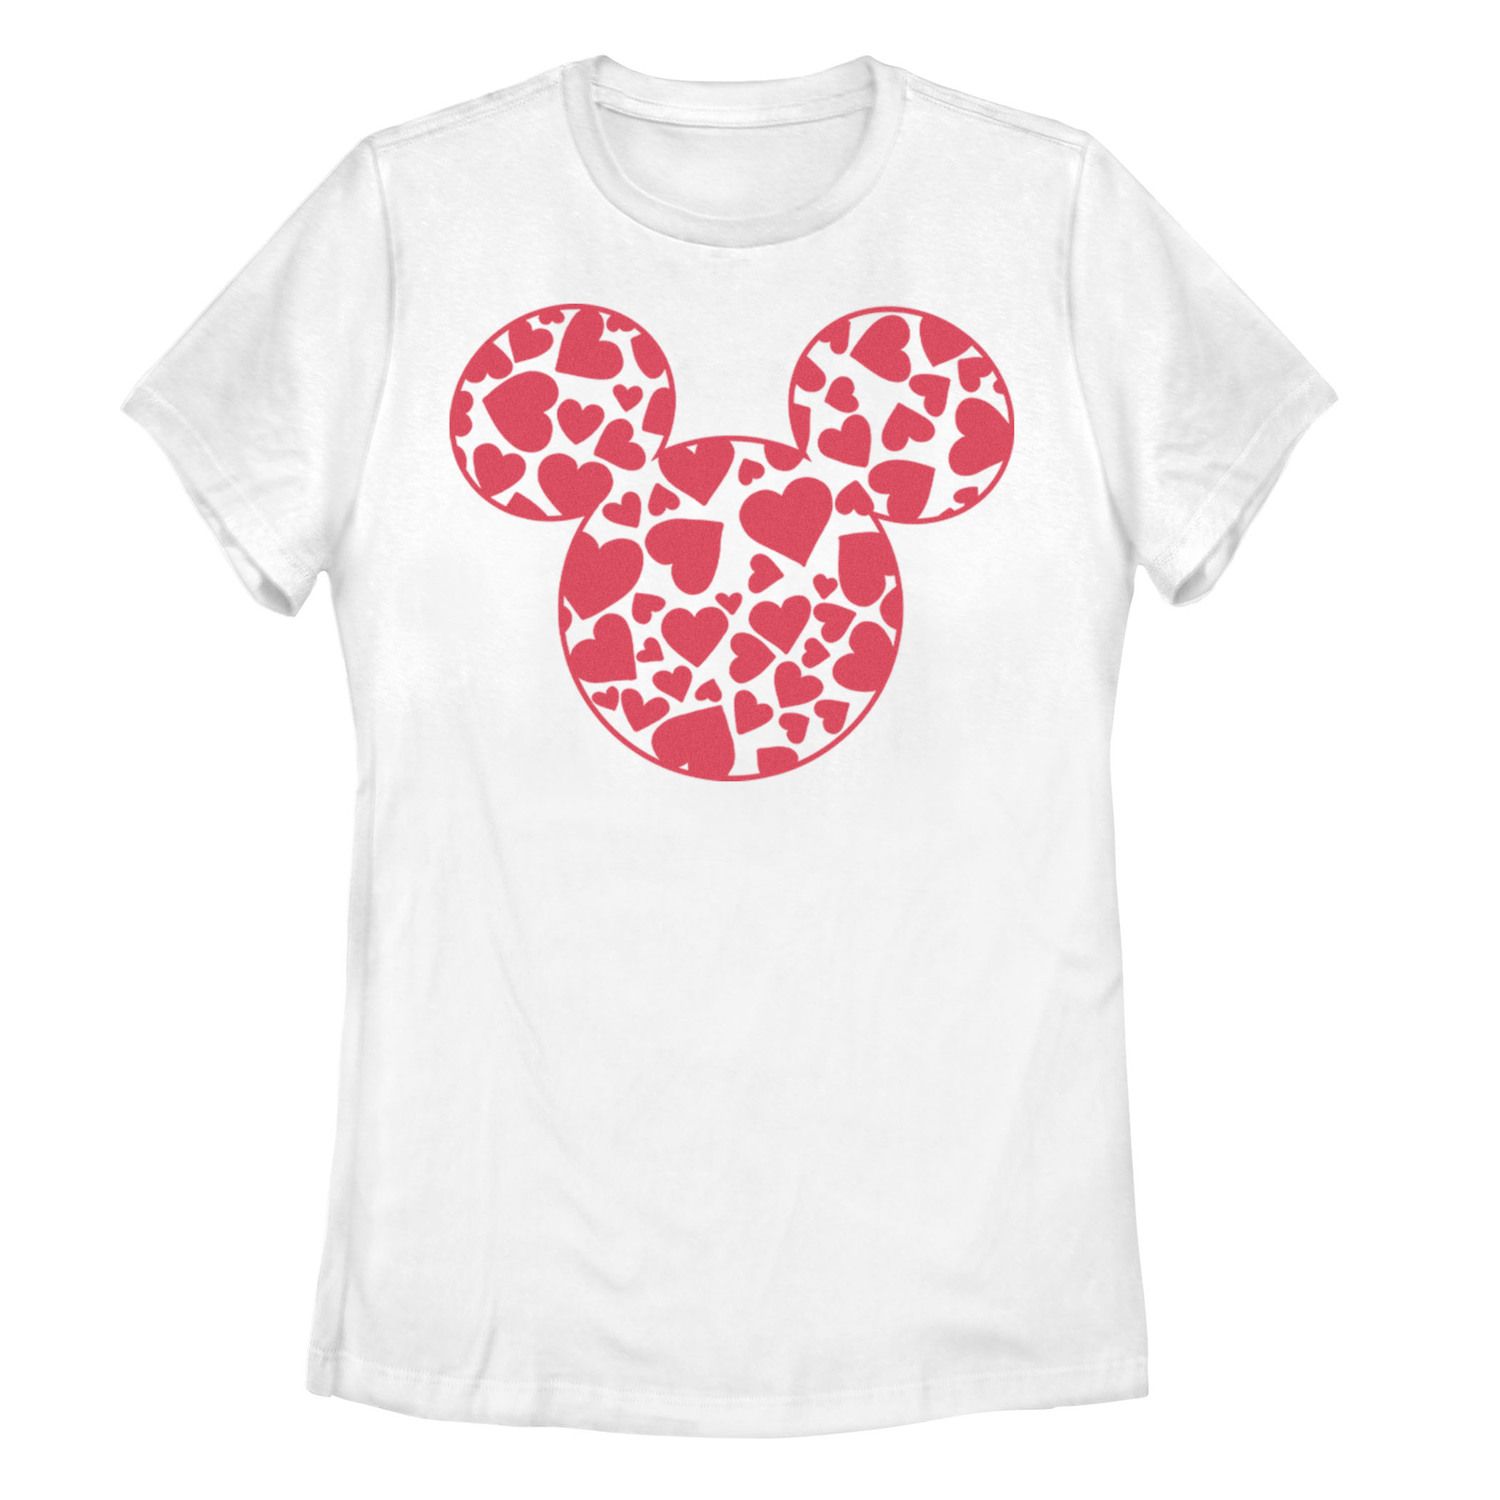 Image for Licensed Character Disney's Mickey Mouse & Friends Juniors' Valentine's Day Heart Graphic Tee at Kohl's.